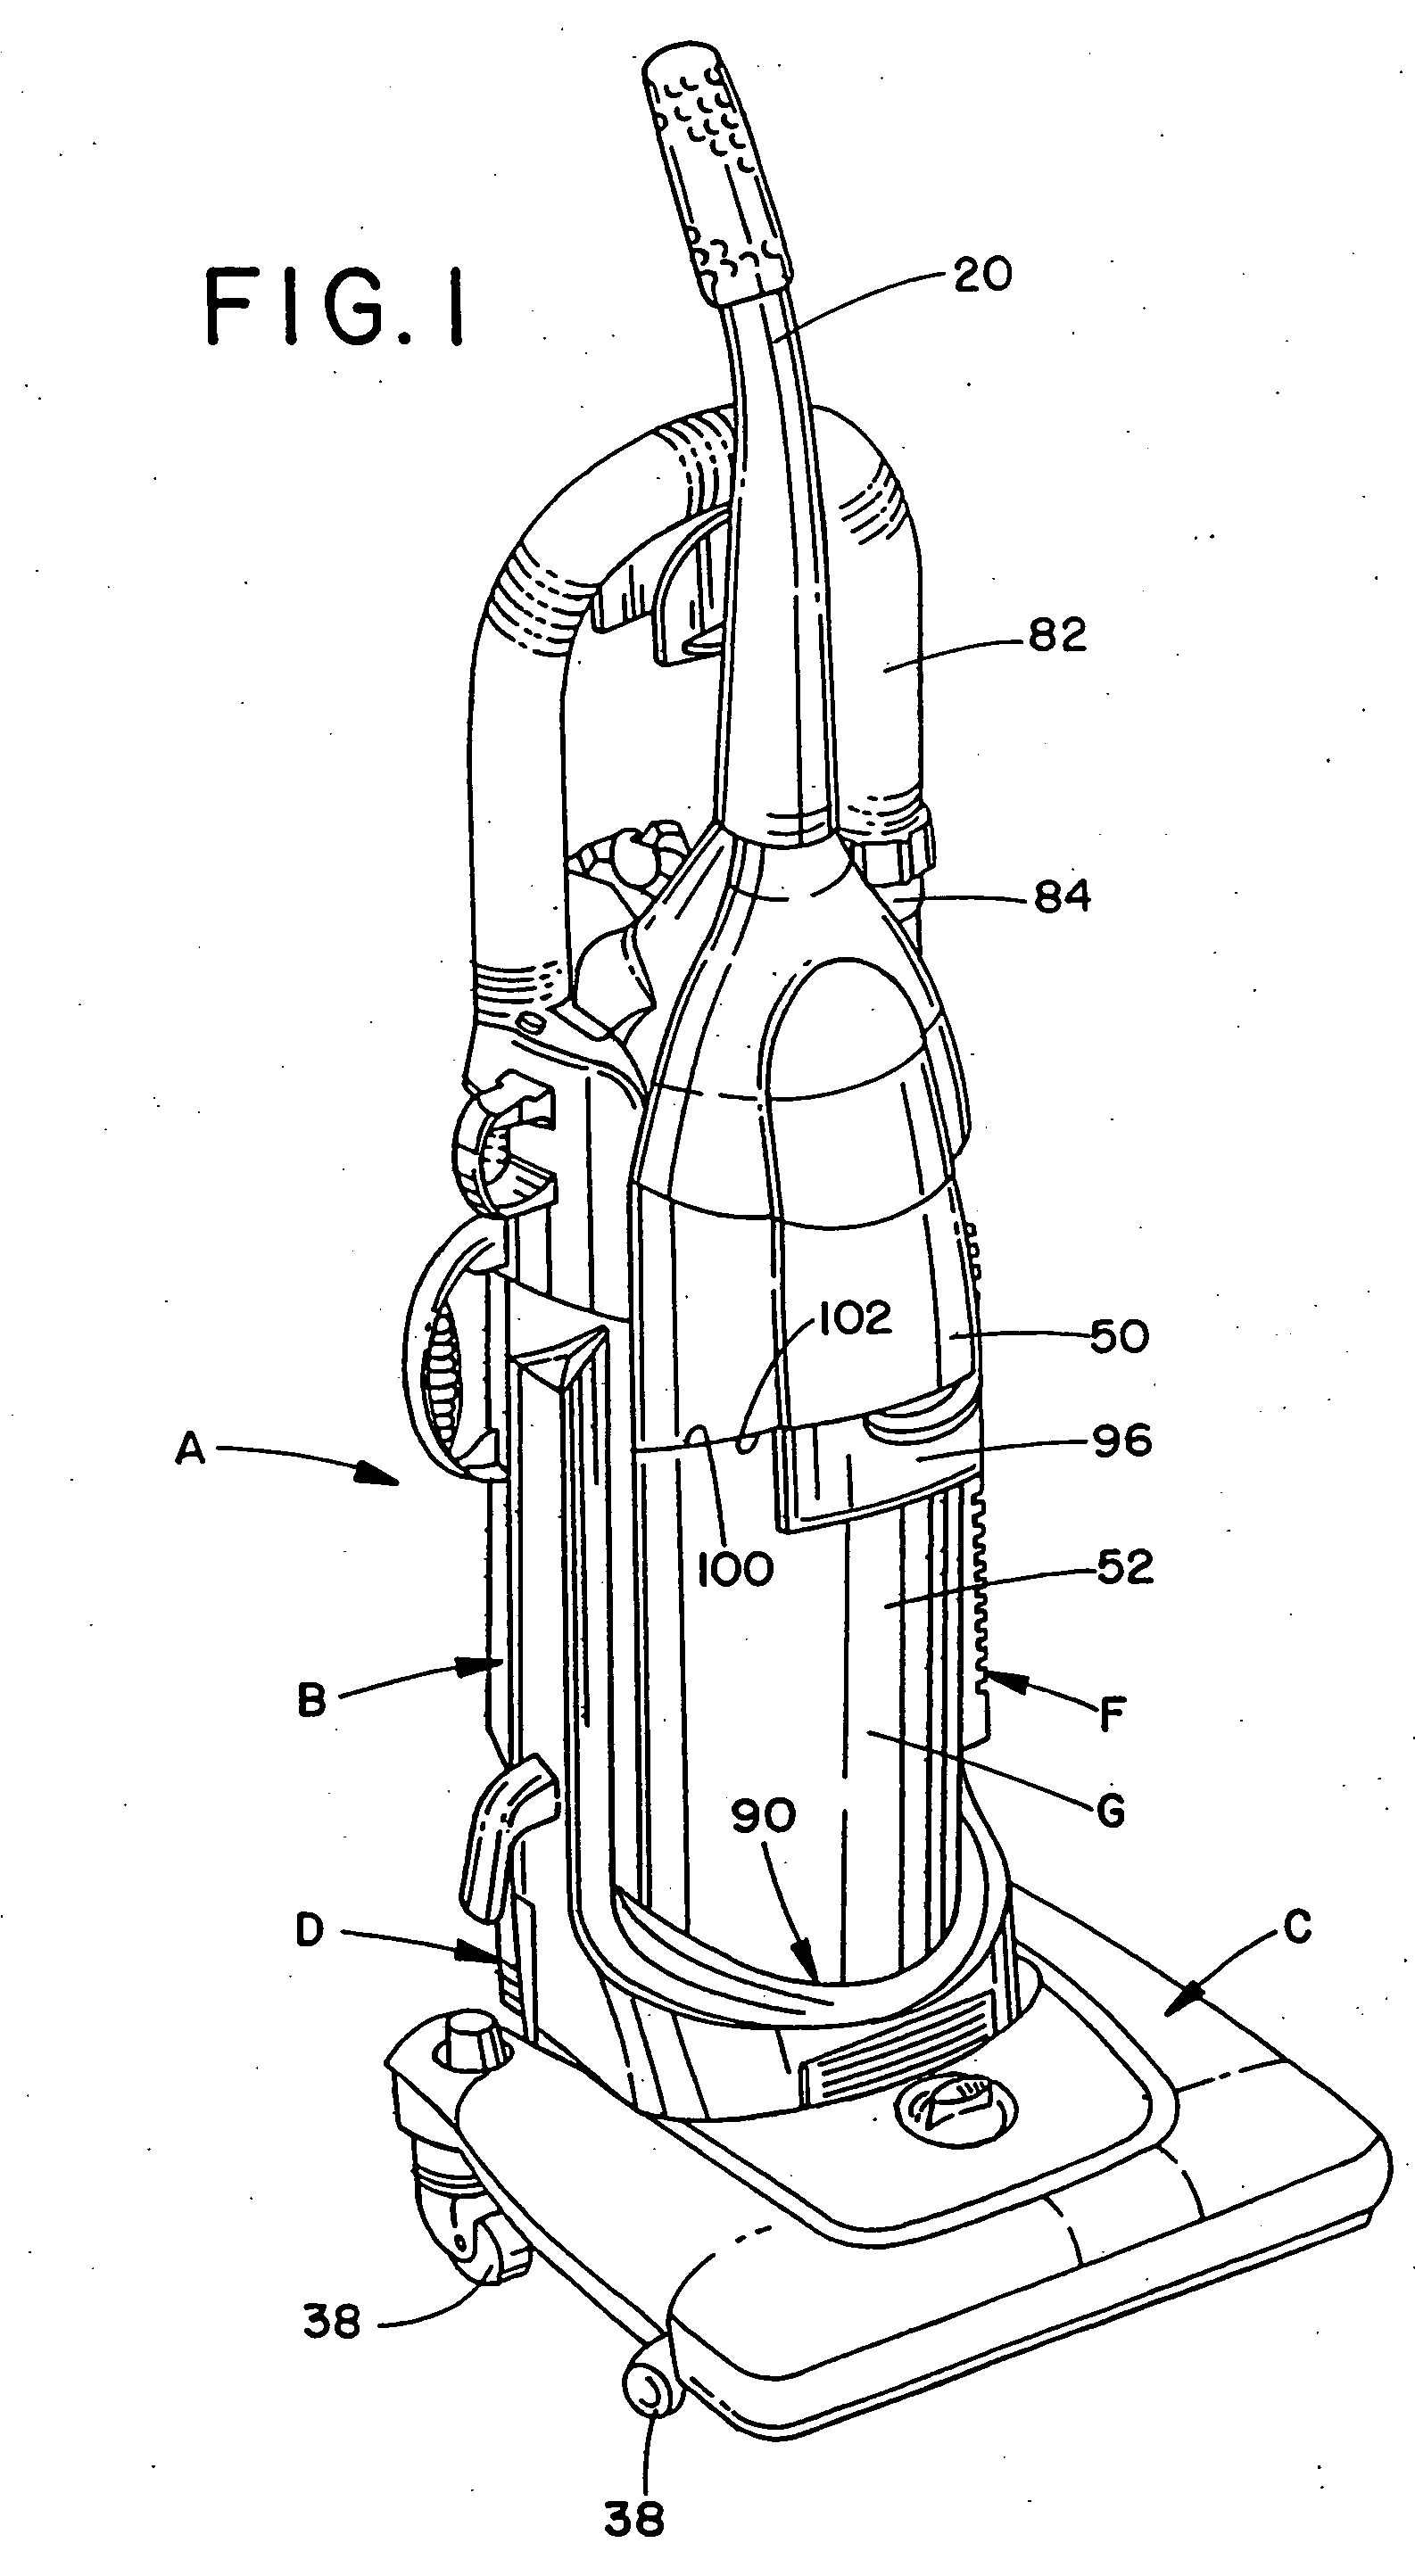 Upright vacuum cleaner with cyclonic air flow